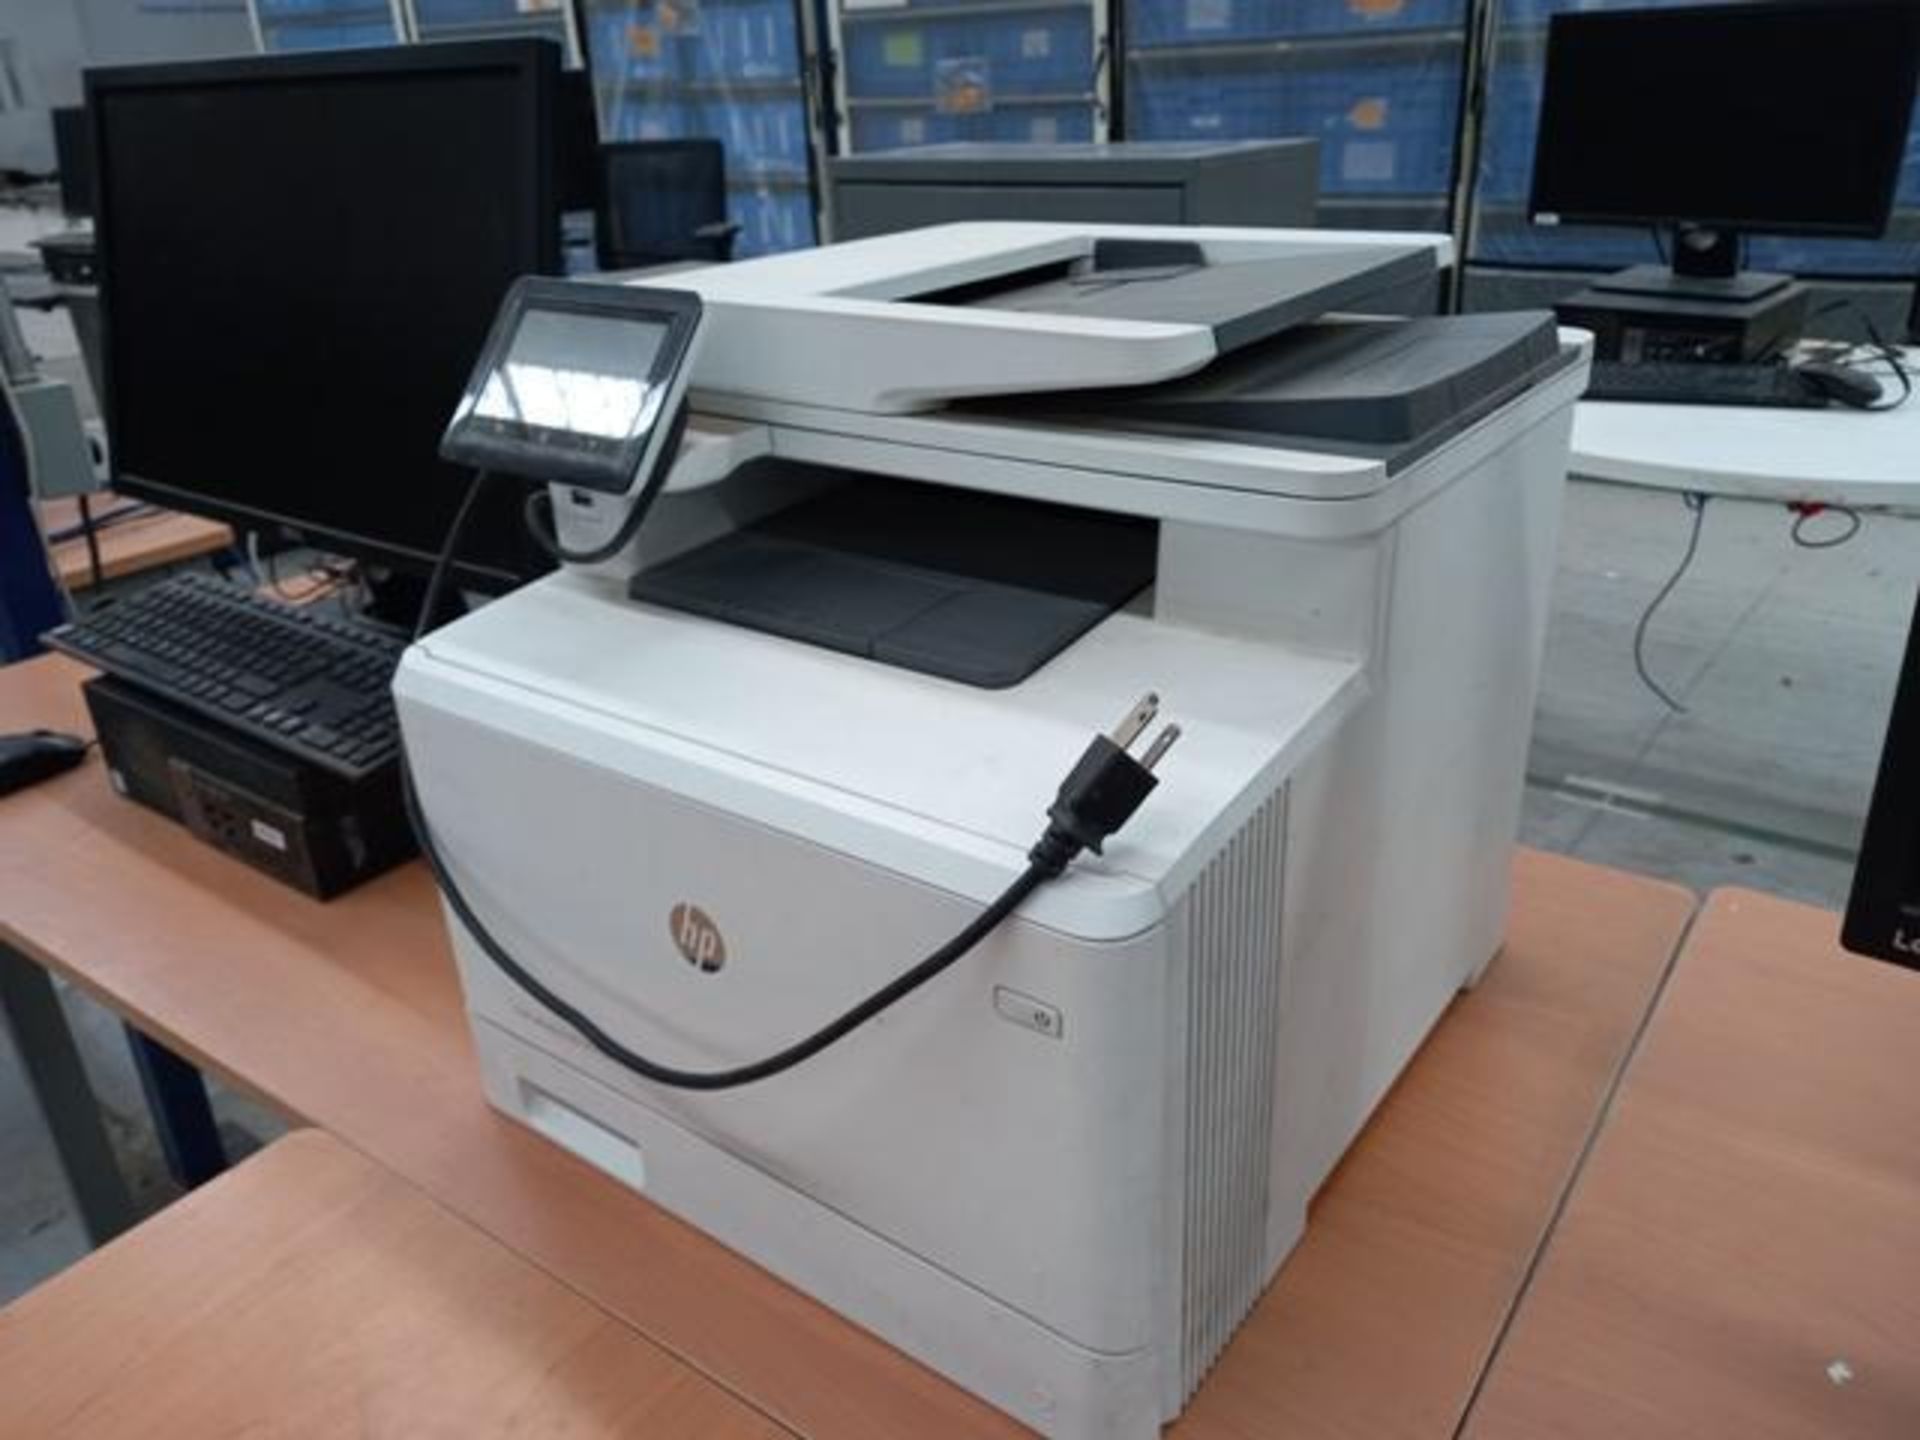 LOT: (66) Of Furniture and Computing Equipment Consisting of: Computers, Printers, Desks, Chairs, Dr